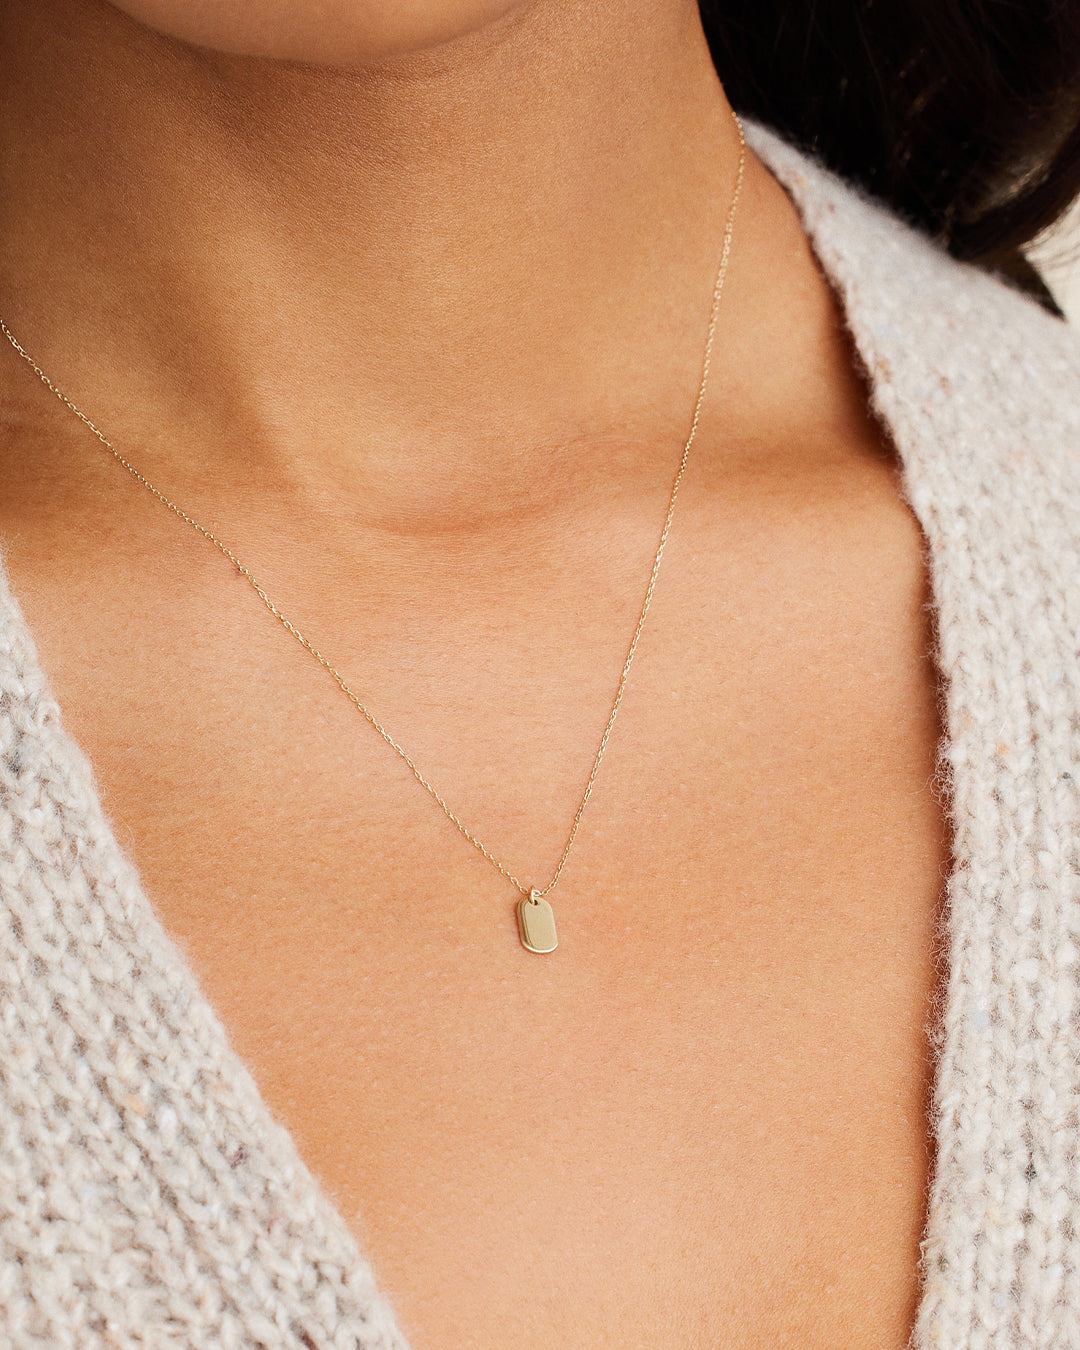 Mini Dog Tag Asymmetry Chain Necklace